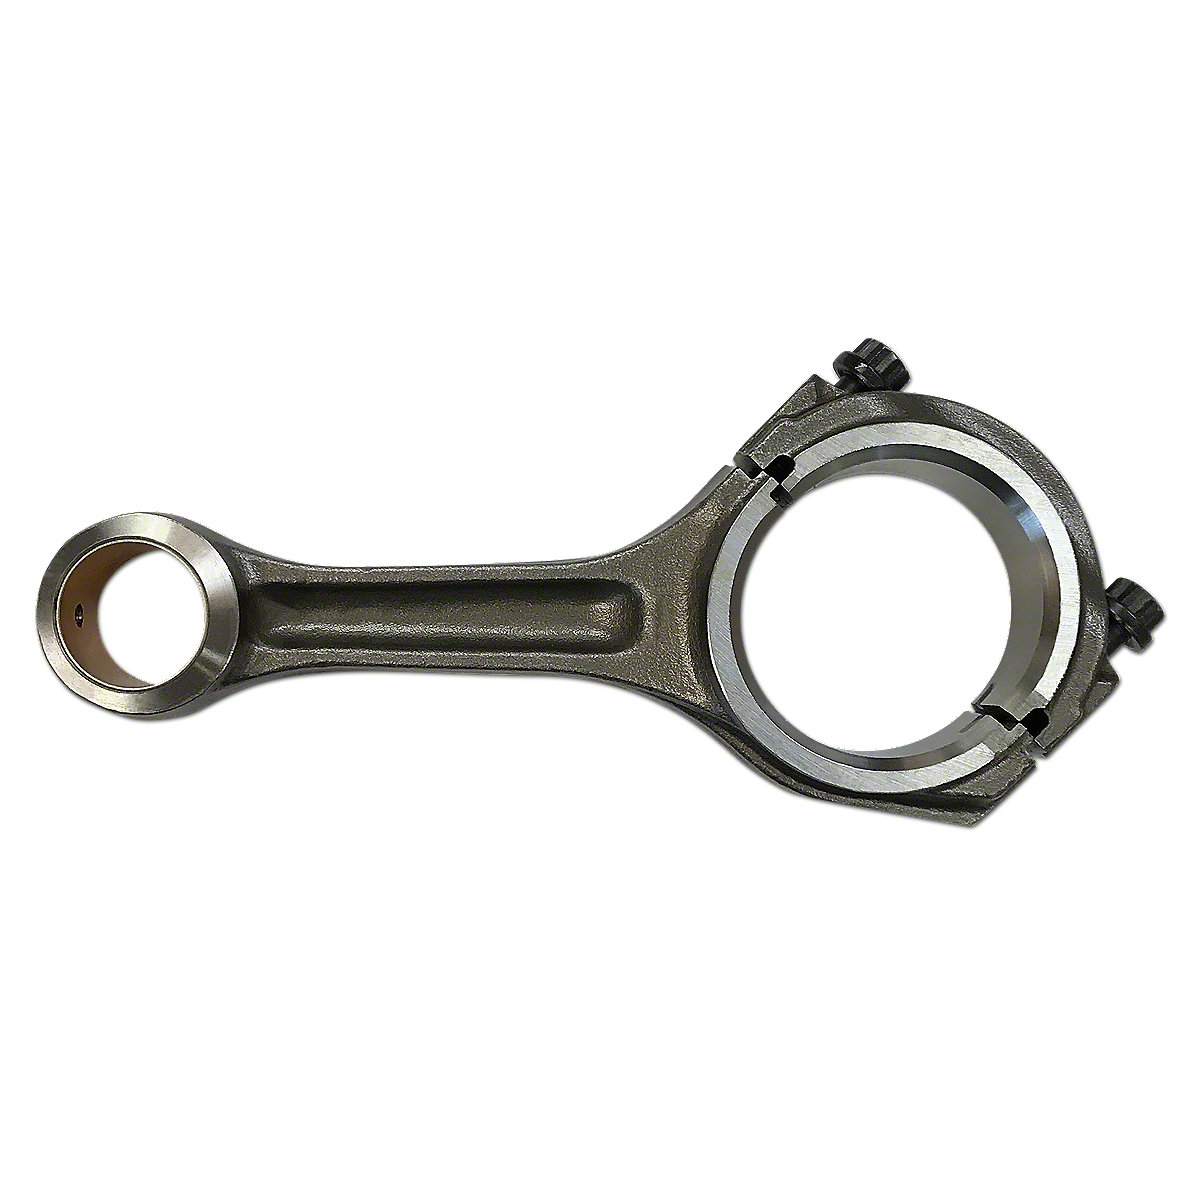 New Connecting Rod with Bushing